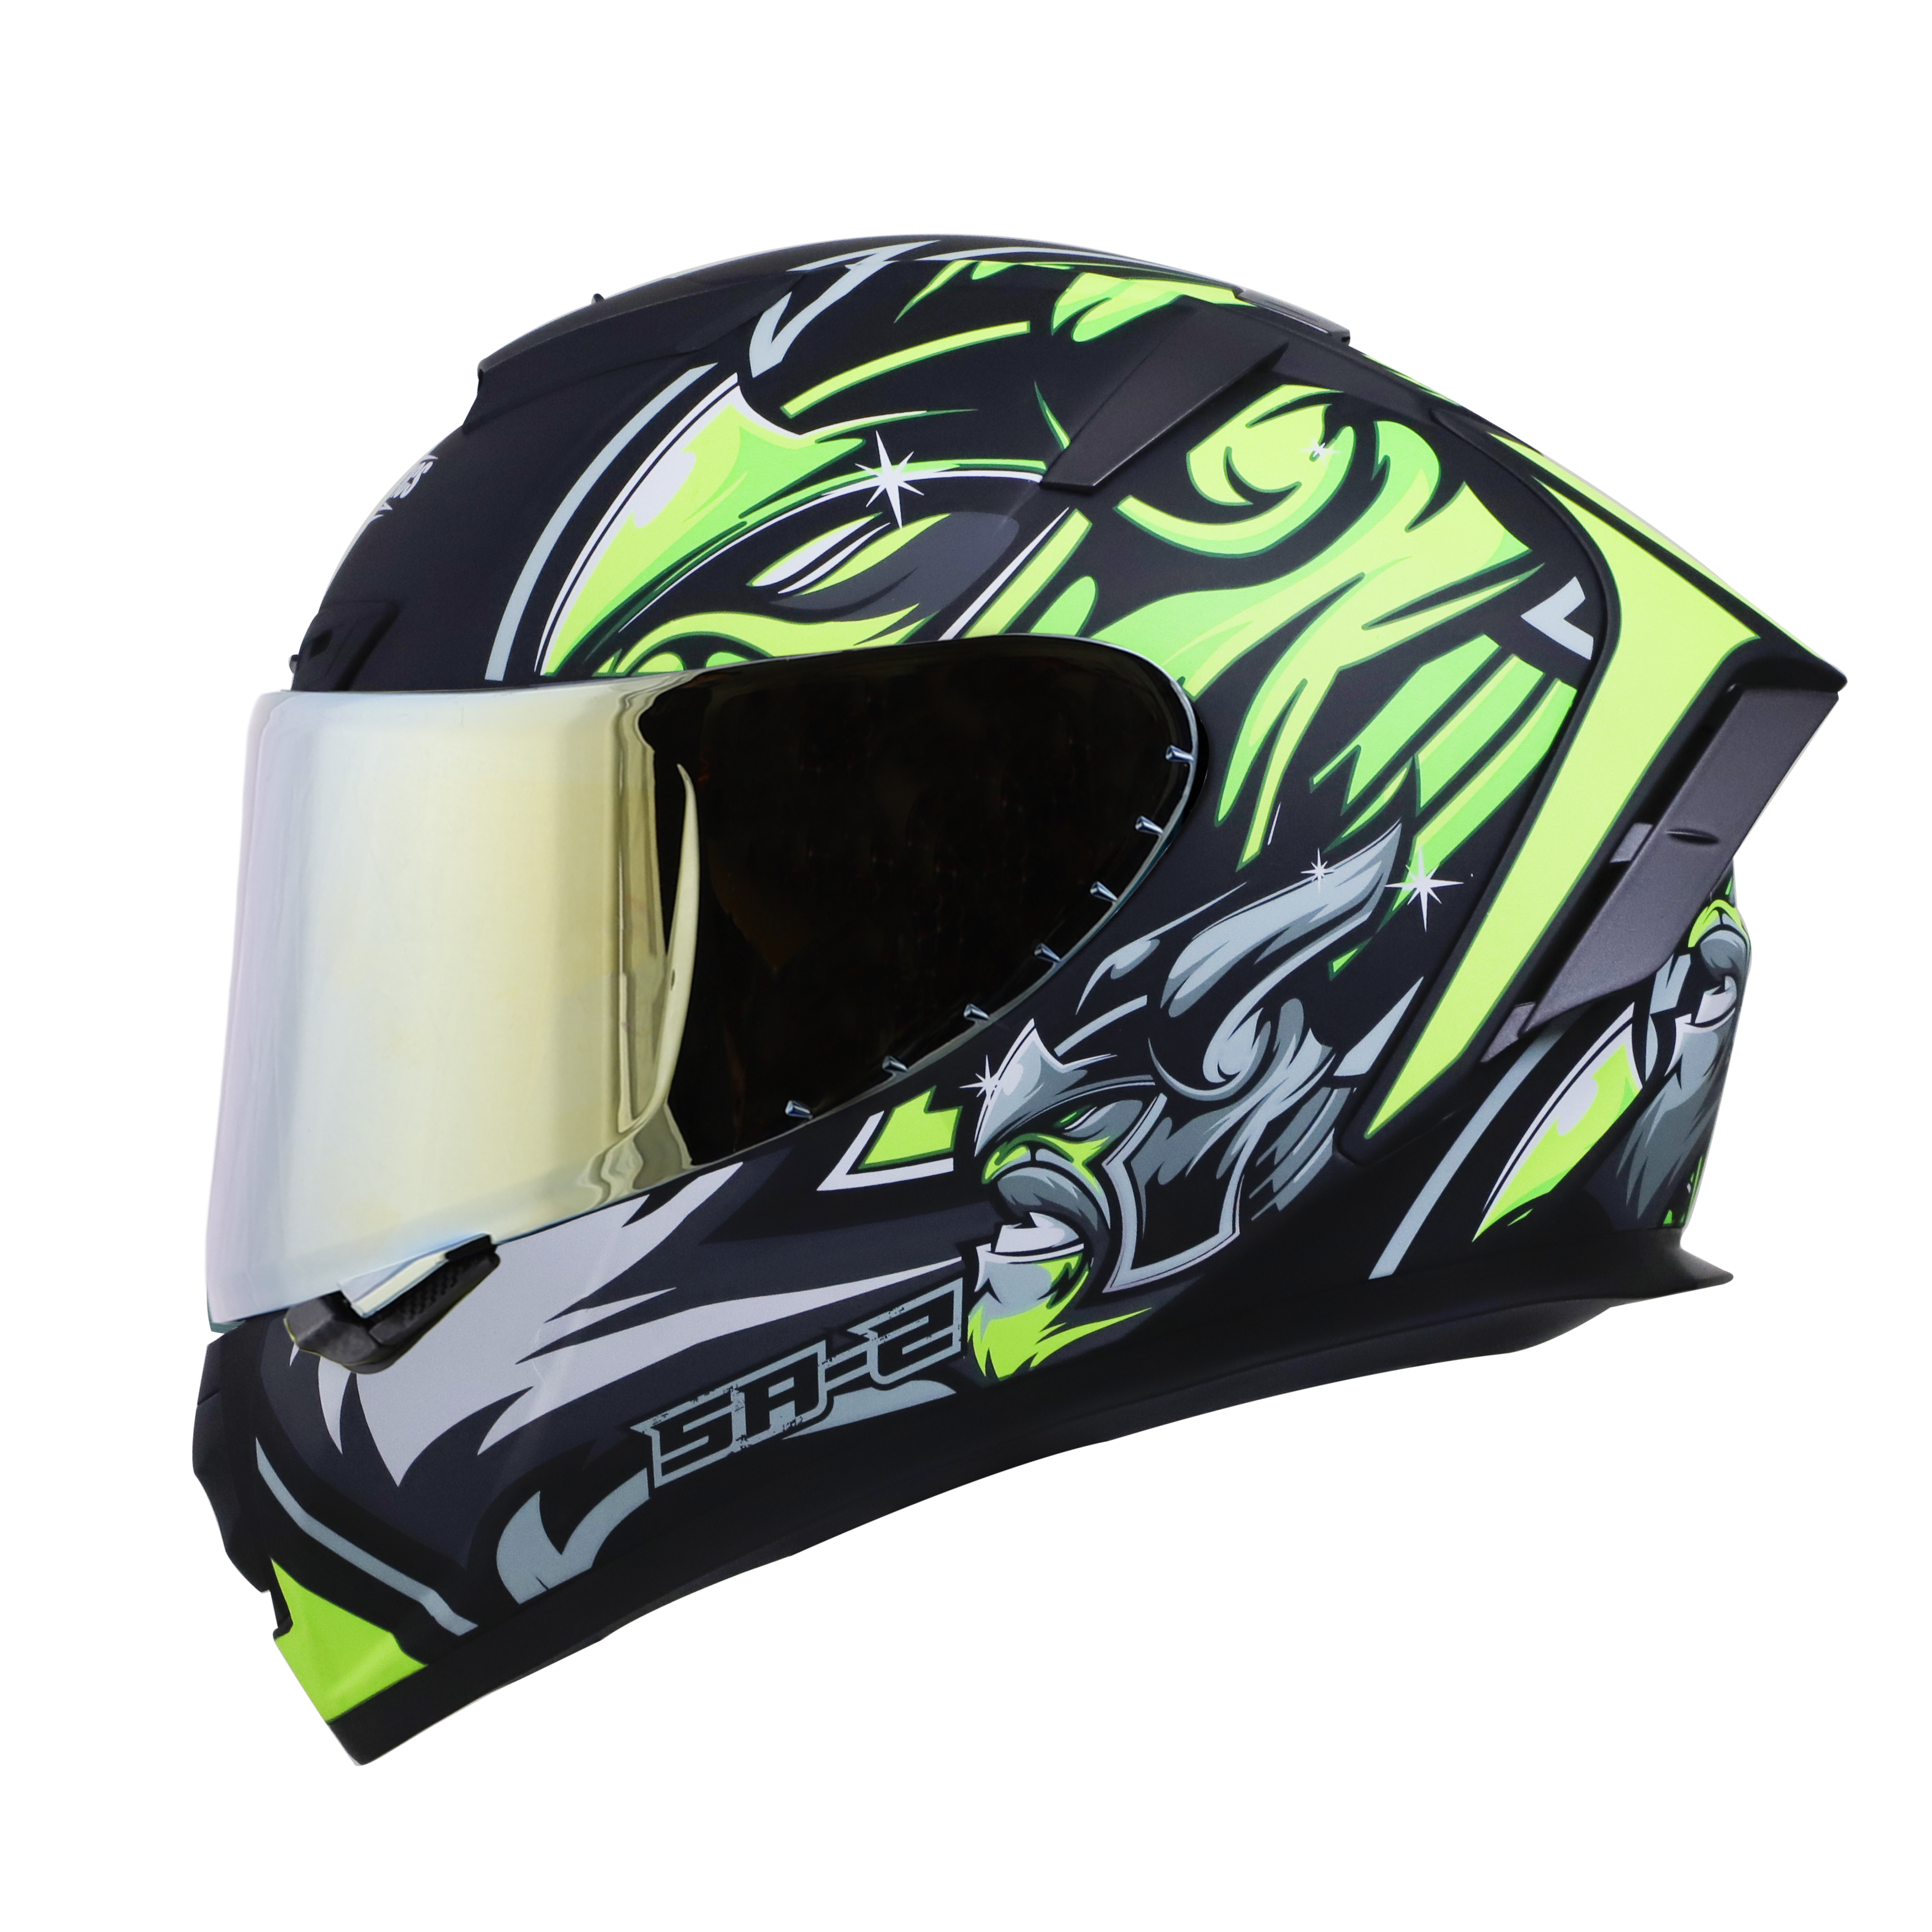 STEELBIRD launches “SA-2” HELMET—packed with safety & comfort features